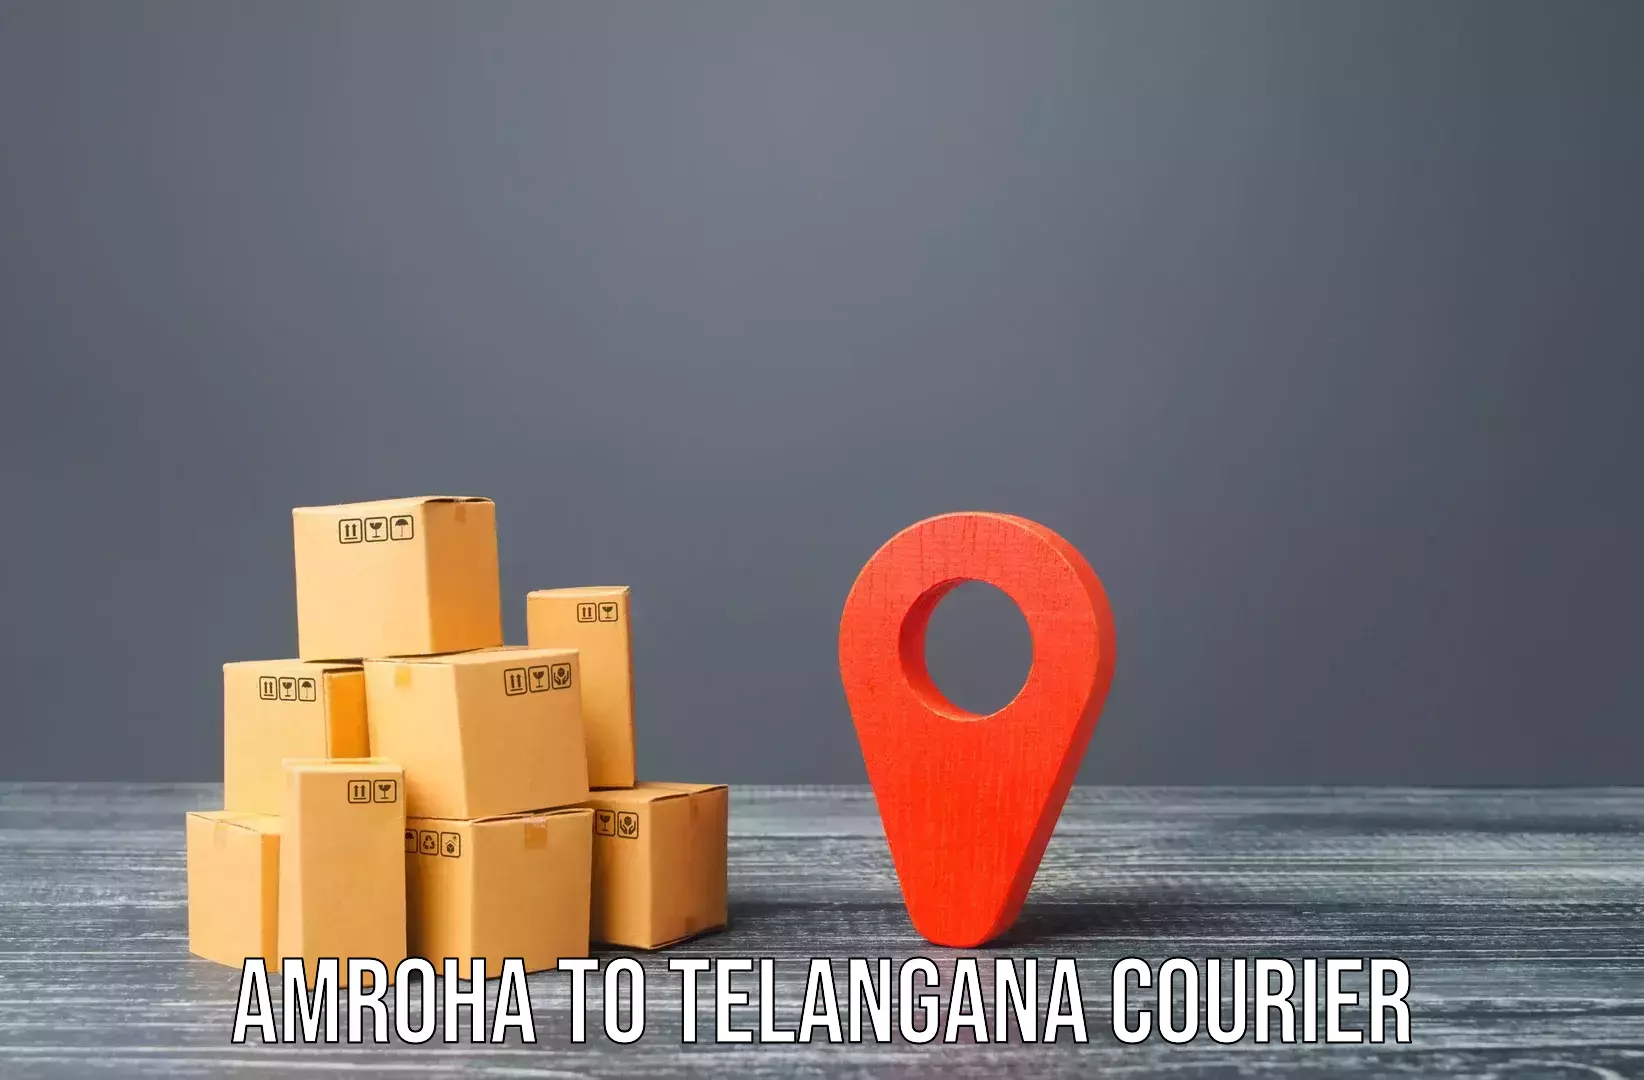 Furniture transport and storage in Amroha to Vemulawada